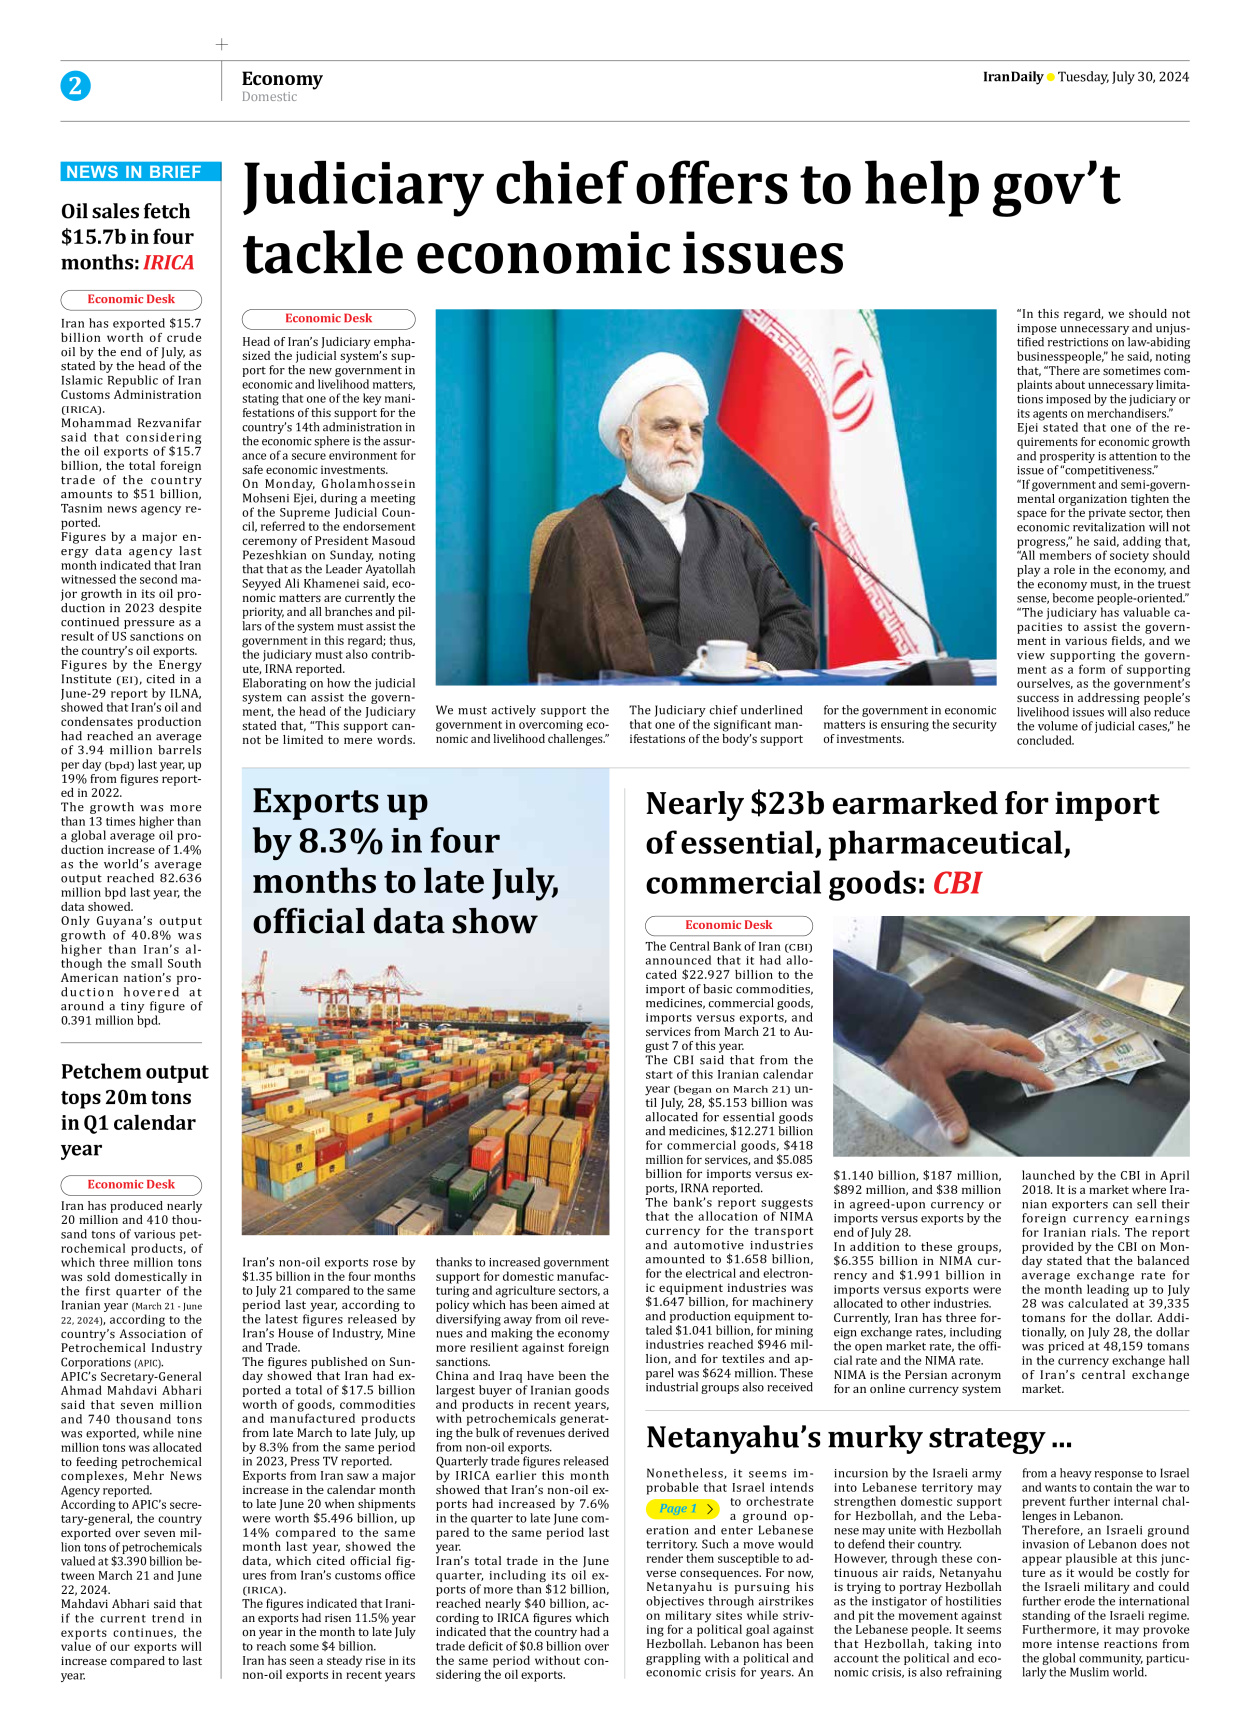 Iran Daily - Number Seven Thousand Six Hundred and Fifteen - 30 July 2024 - Page 2